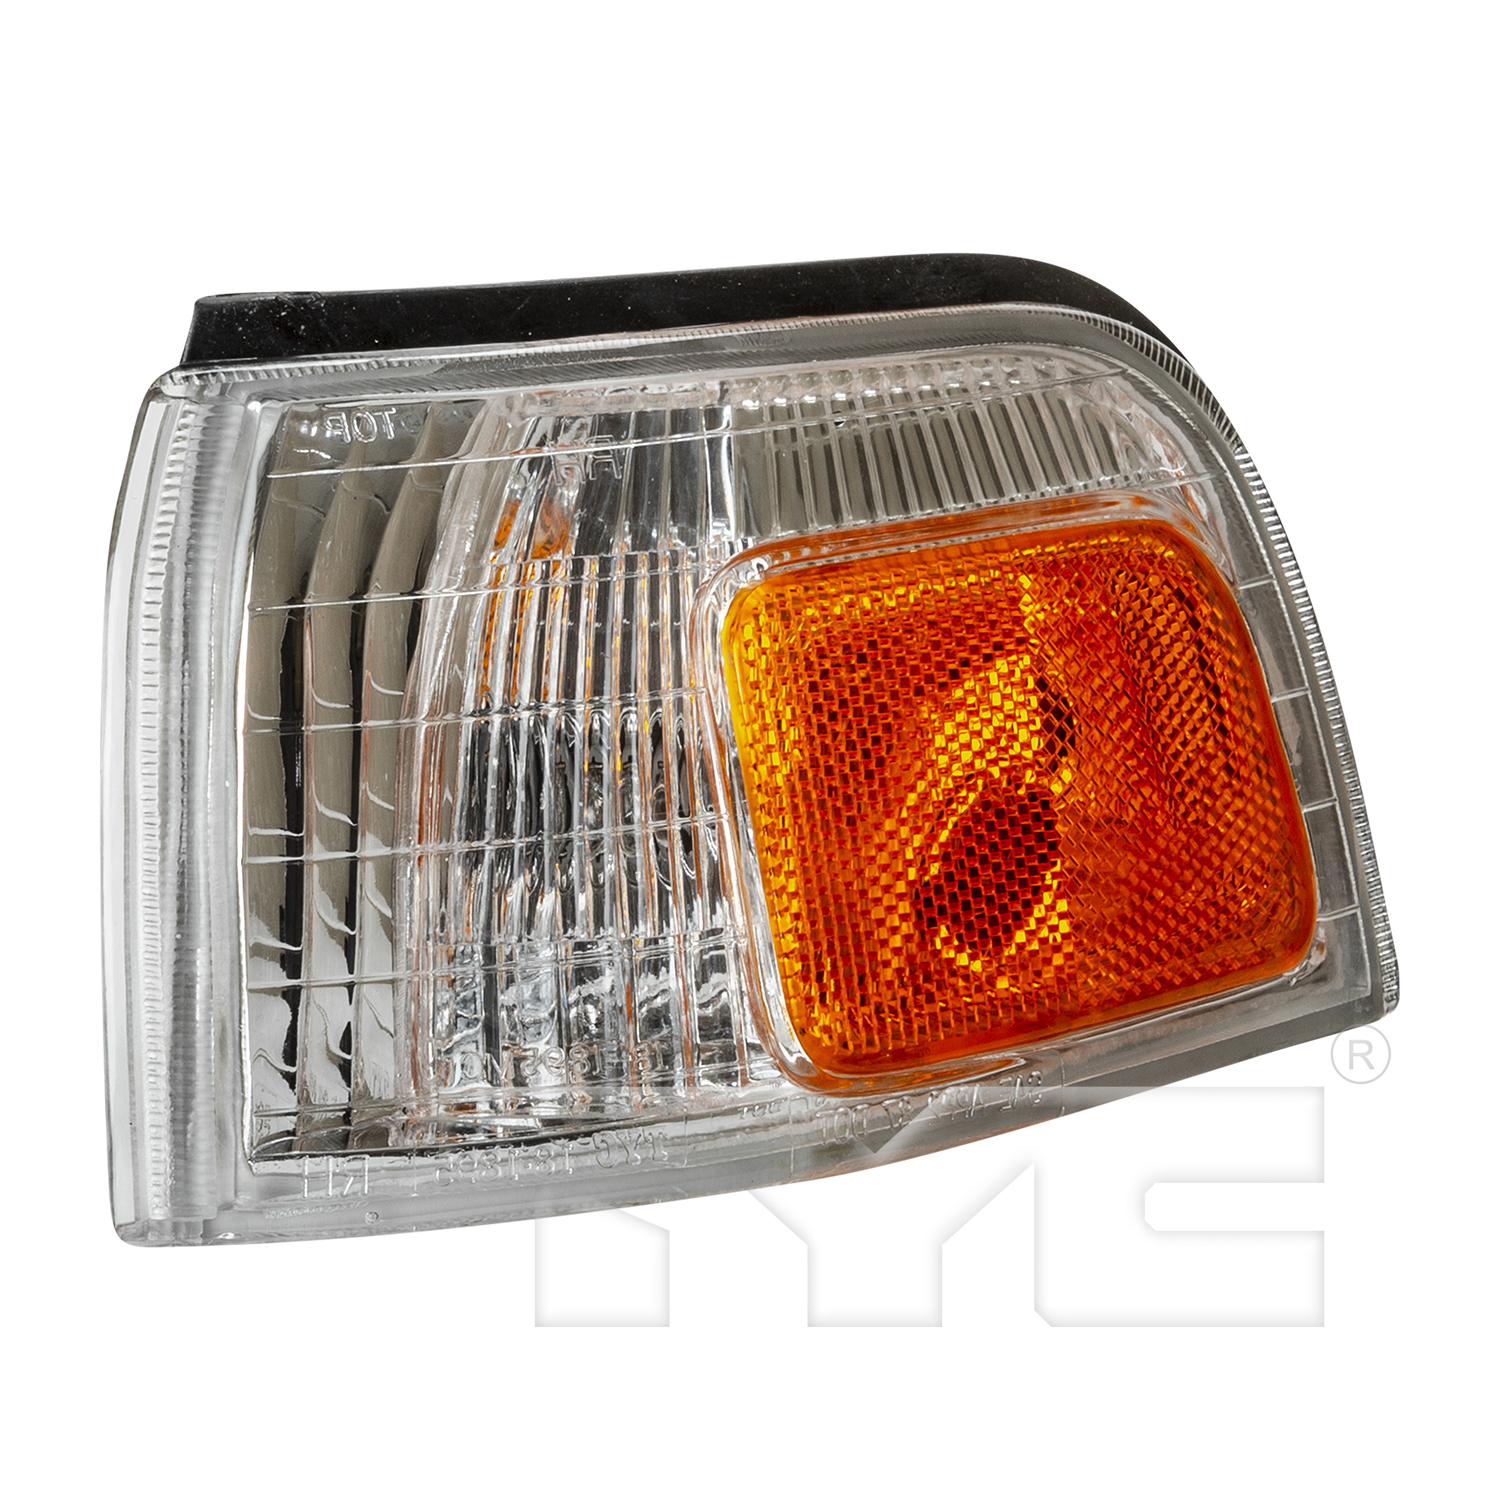 Aftermarket LAMPS for HONDA - ACCORD, ACCORD,90-91,LT Front marker lamp assy